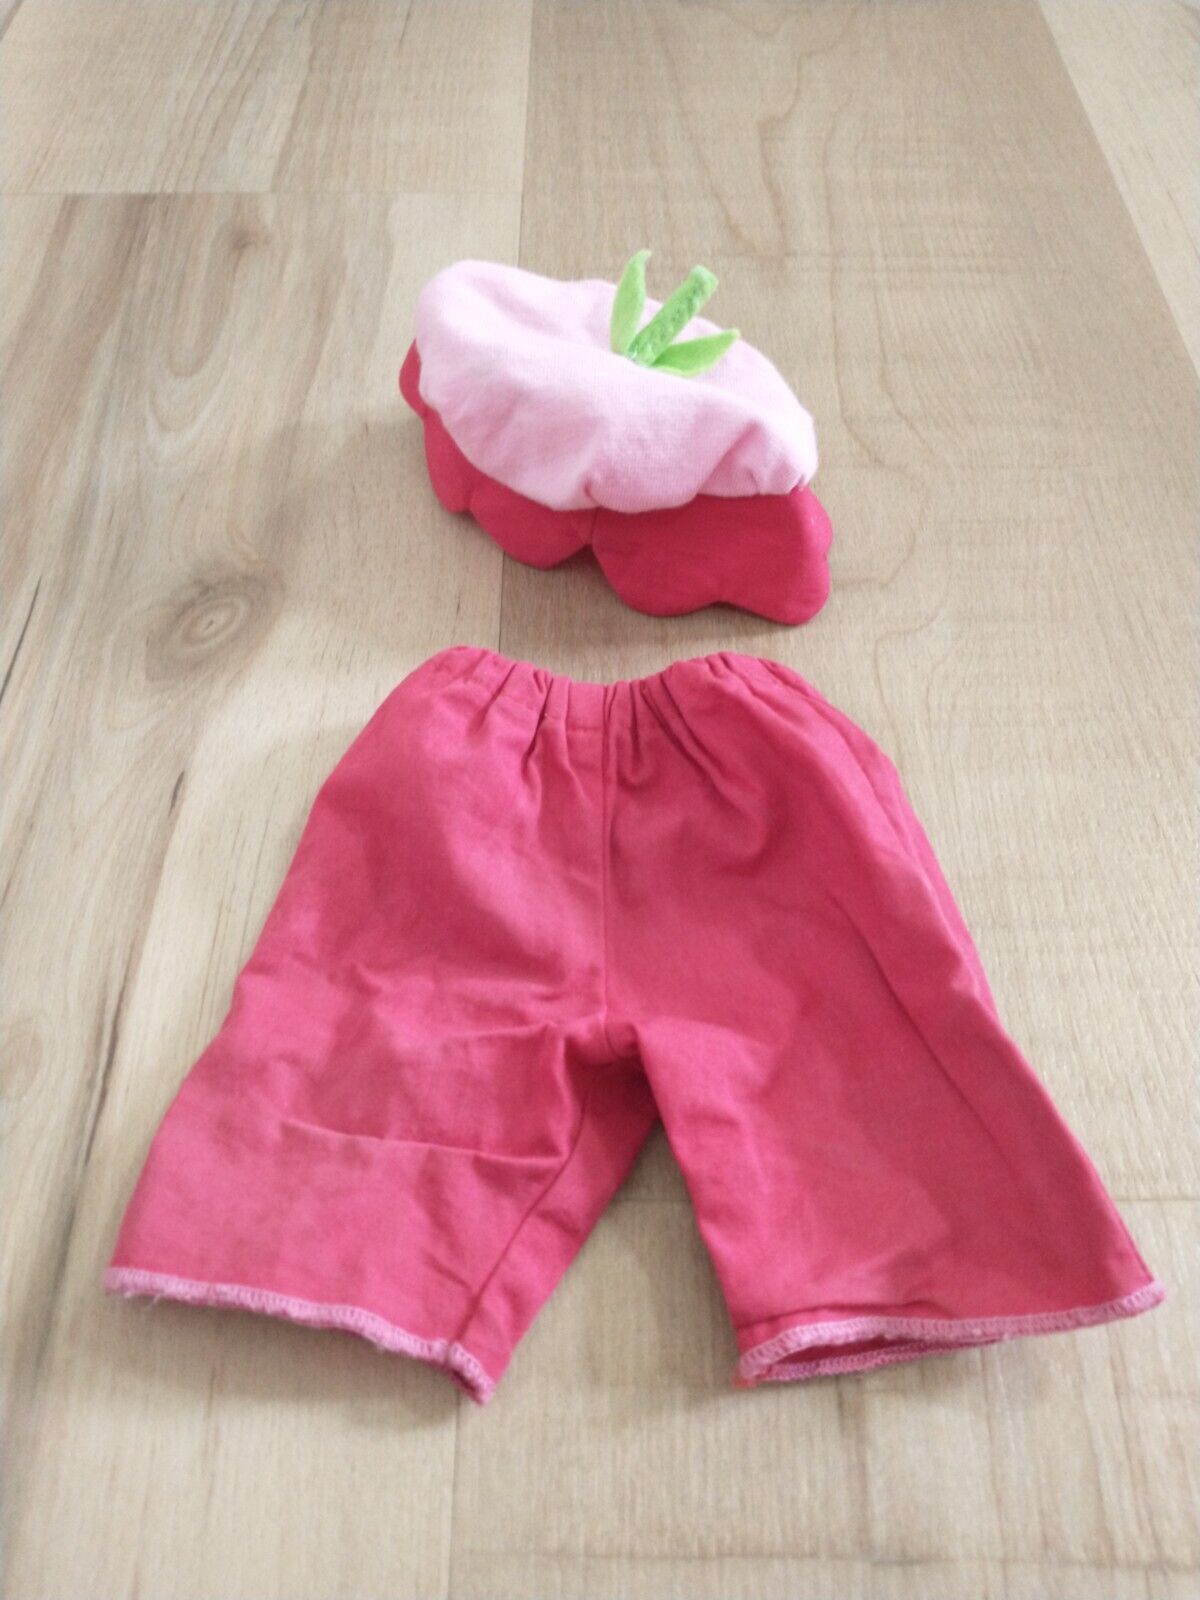 Vintage Tagged Kathe Kruse Doll Hat Pants Pink Strawberry Berry